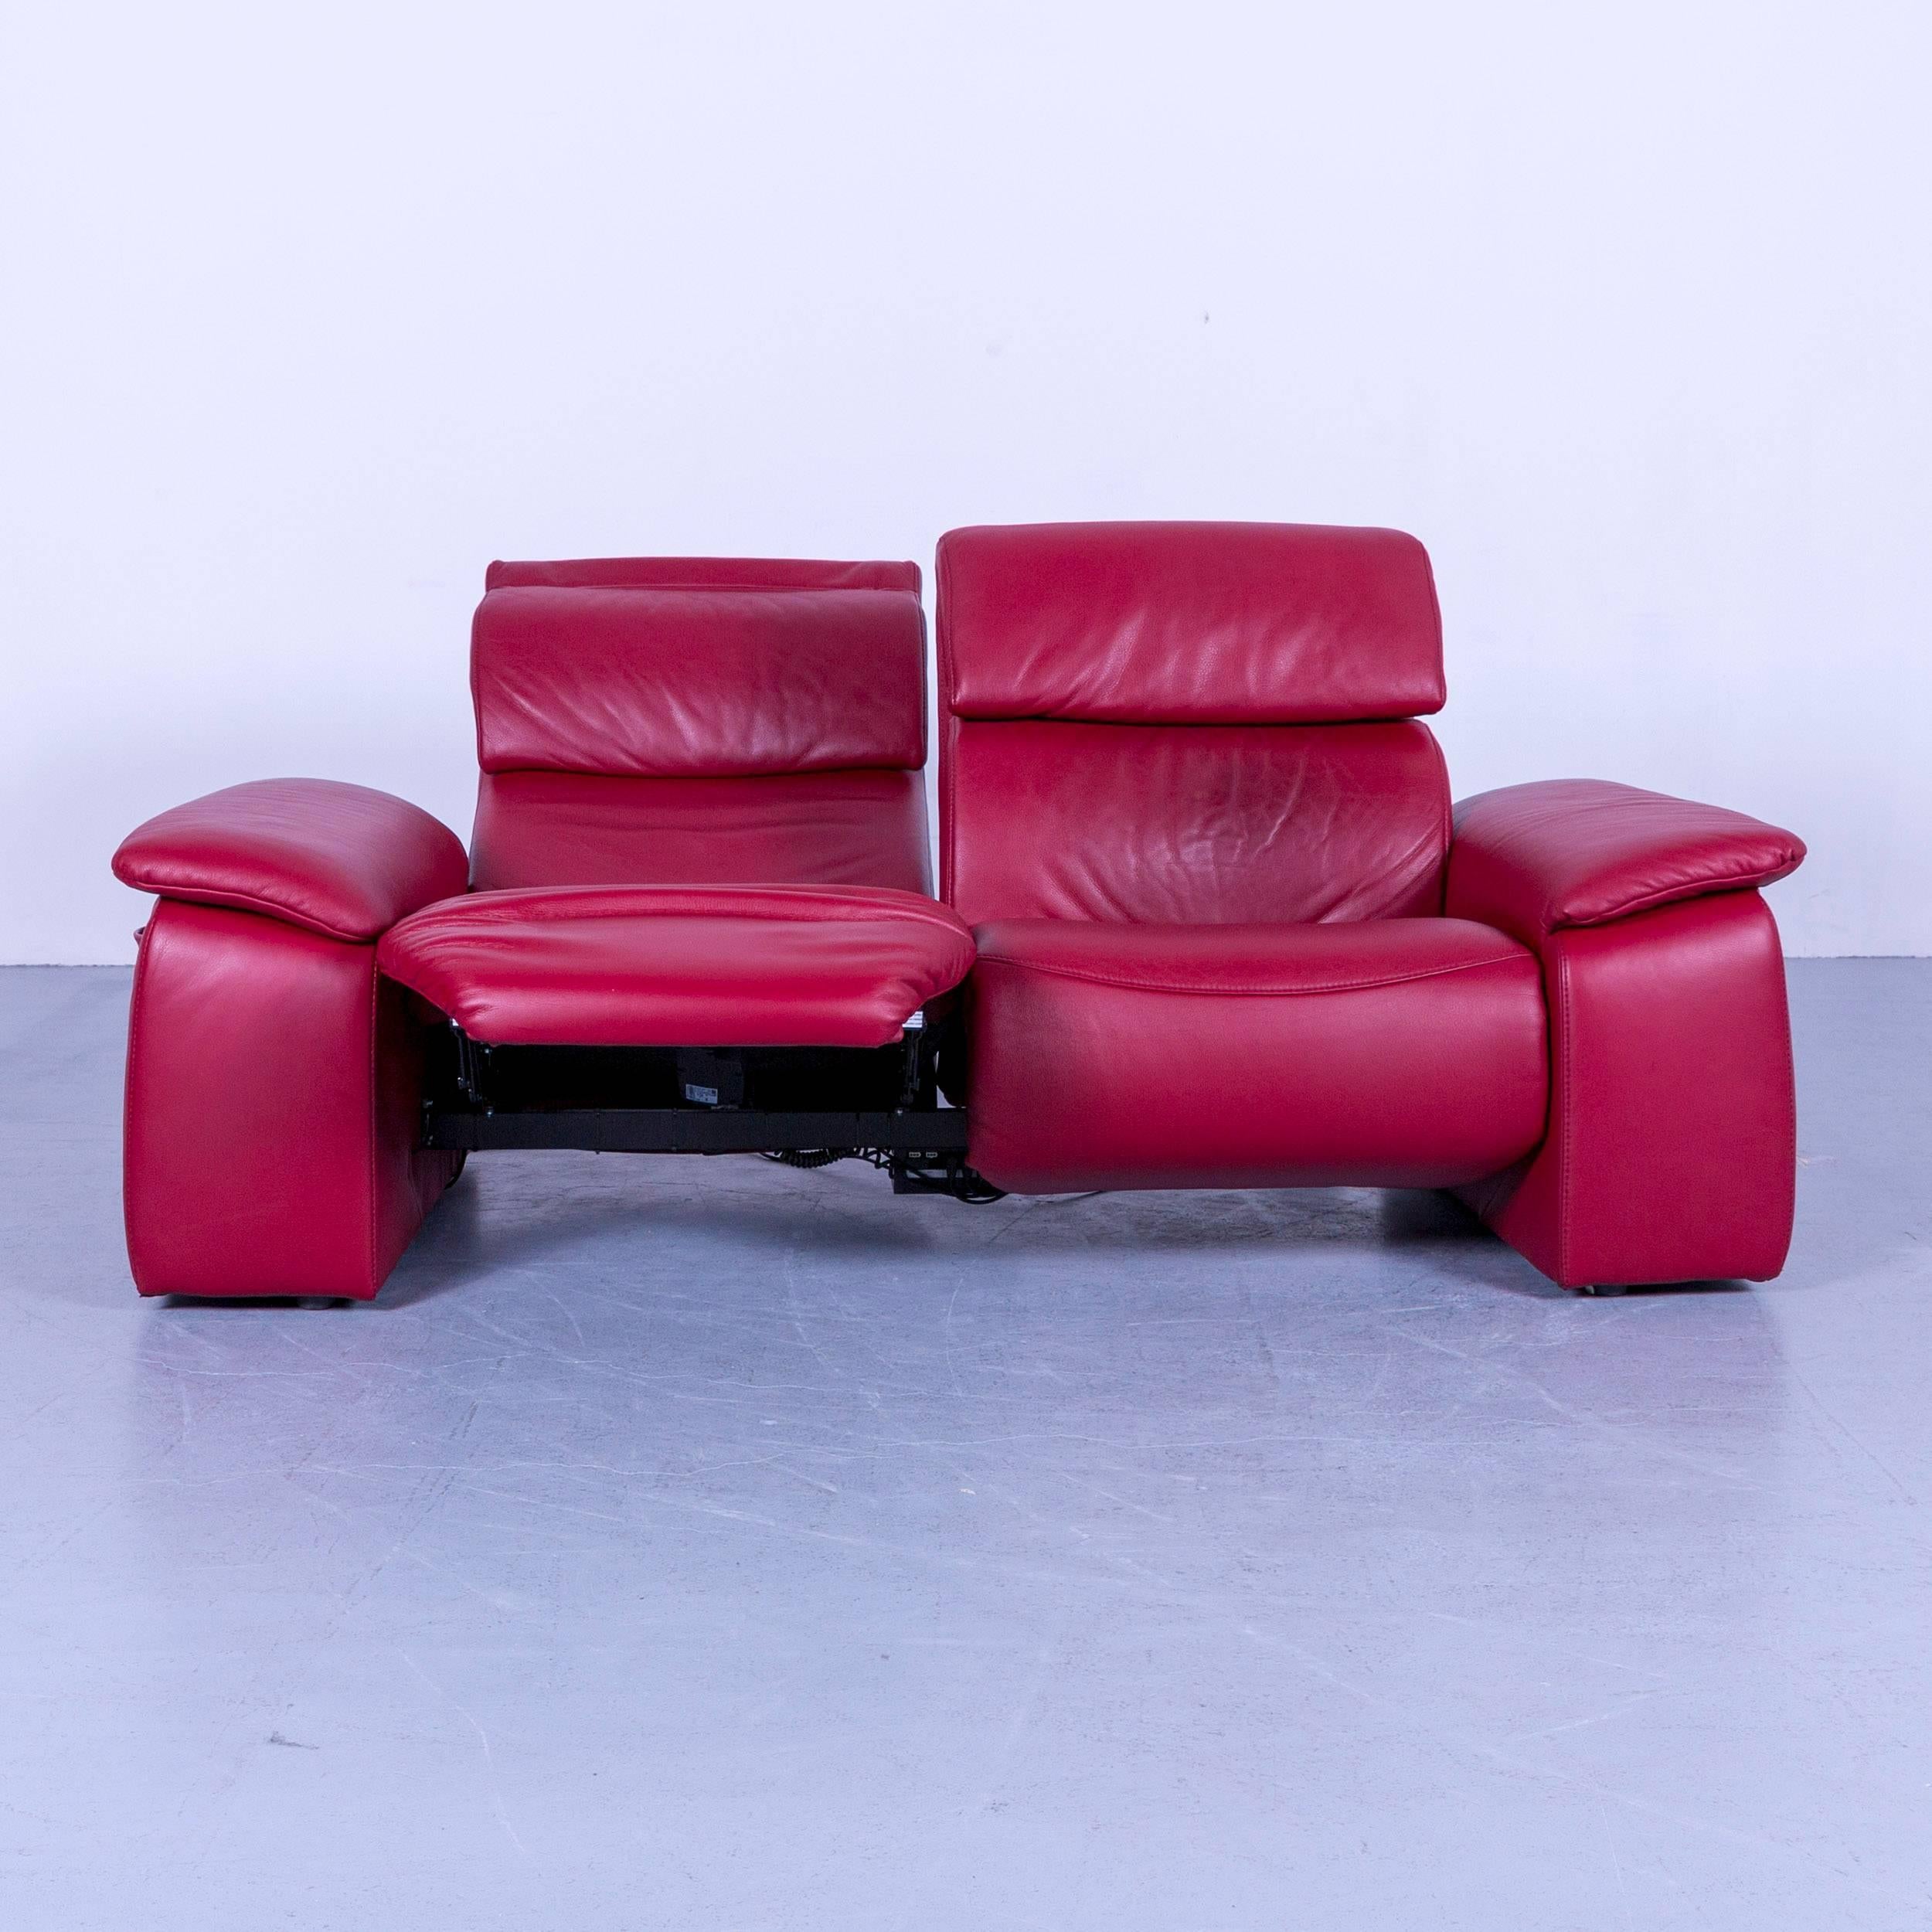 Himolla designer sofa leather red two-seat couch Germany modern, in a minimalistic and modern design, made for pure comfort.